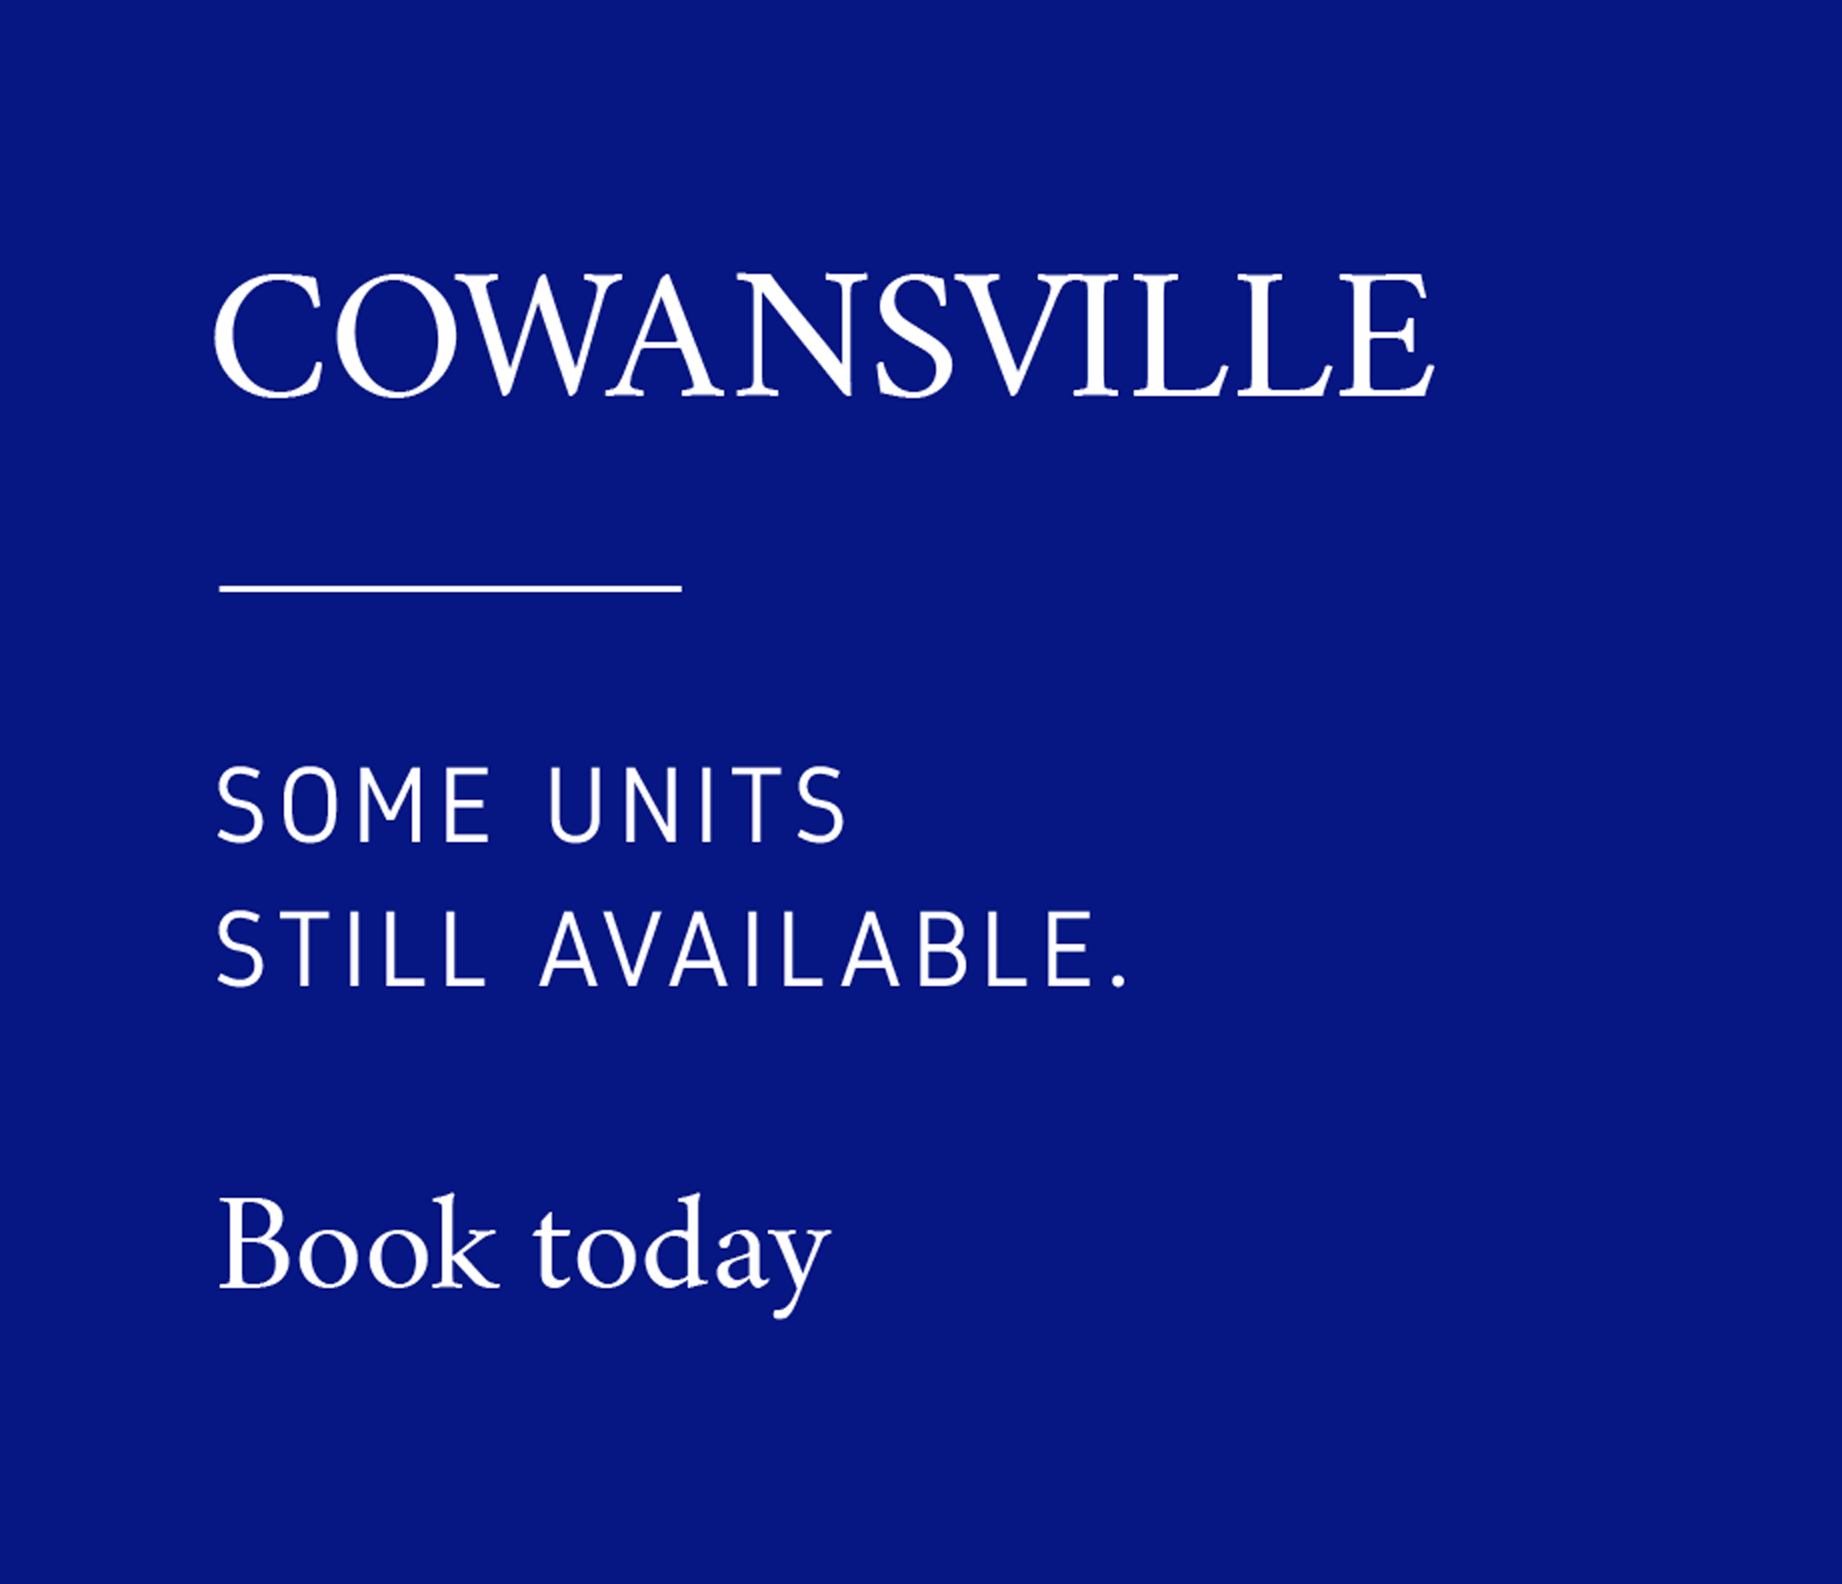 Cowansville - Some units still available